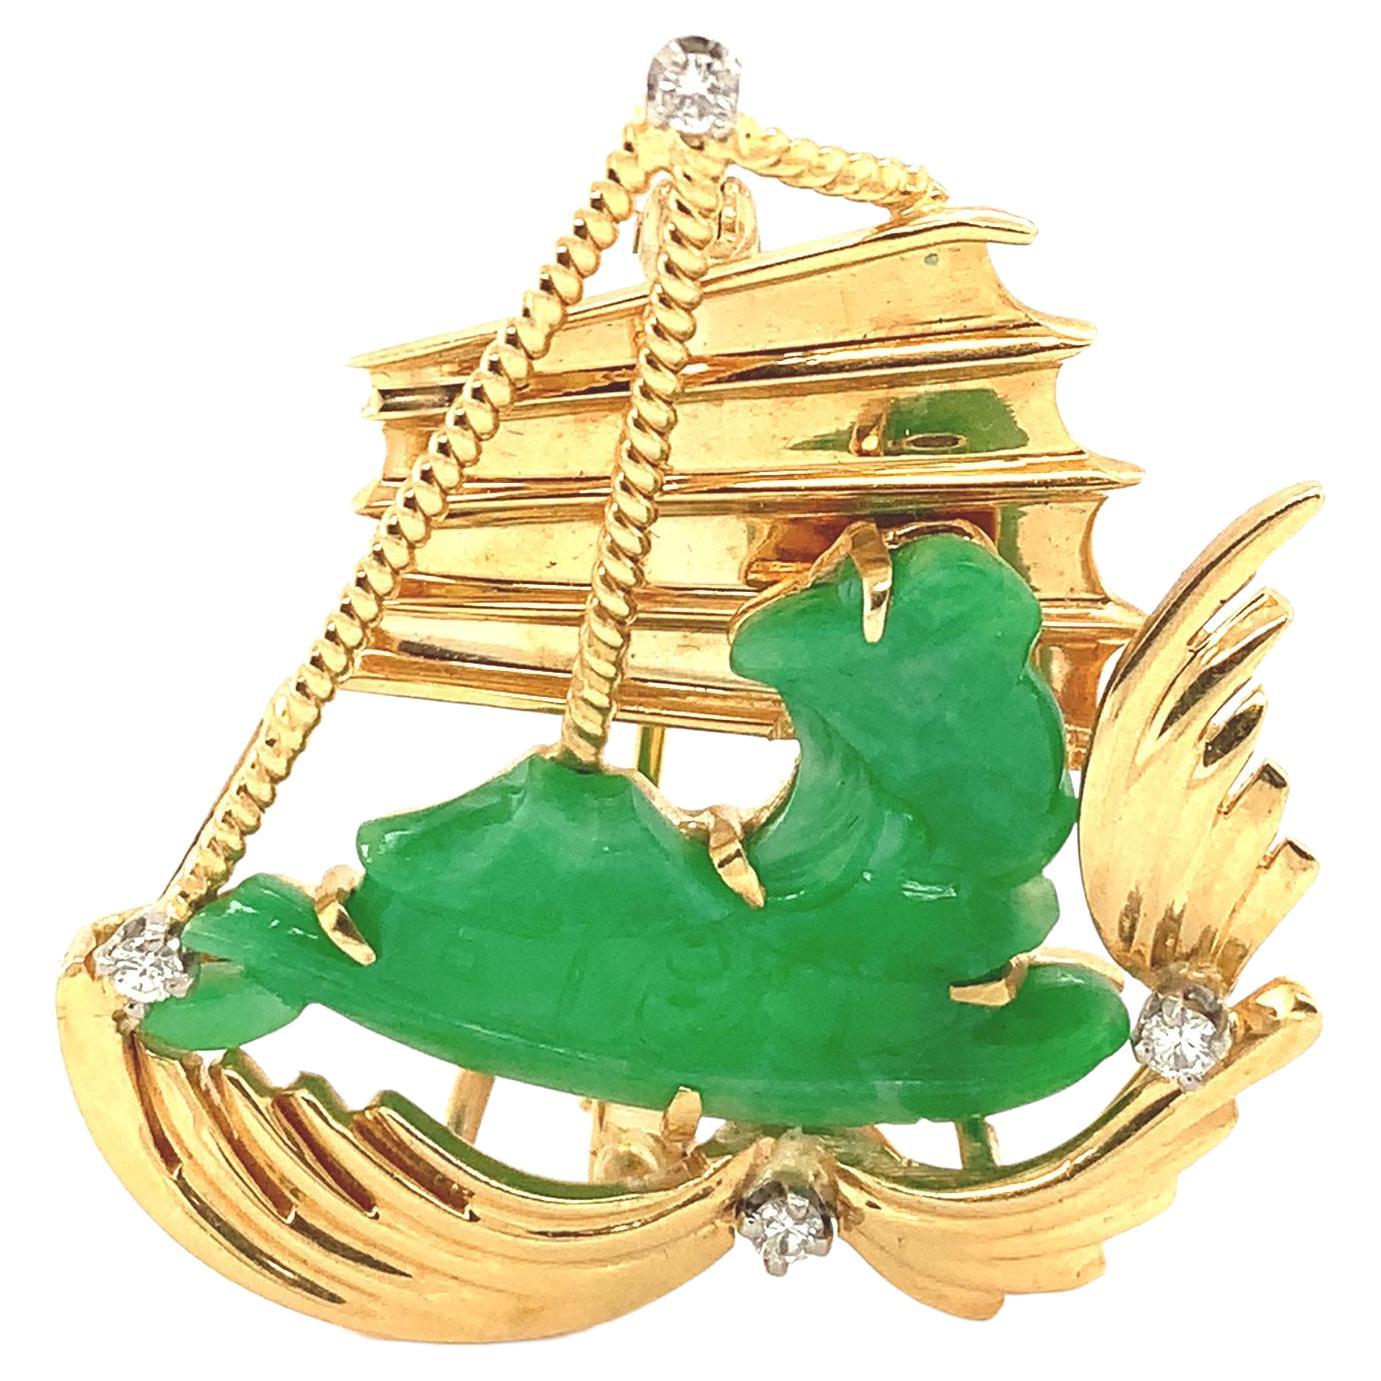 Natural Jadeite Jade Carved Chinese Sailboat and Diamond Gold Brooch